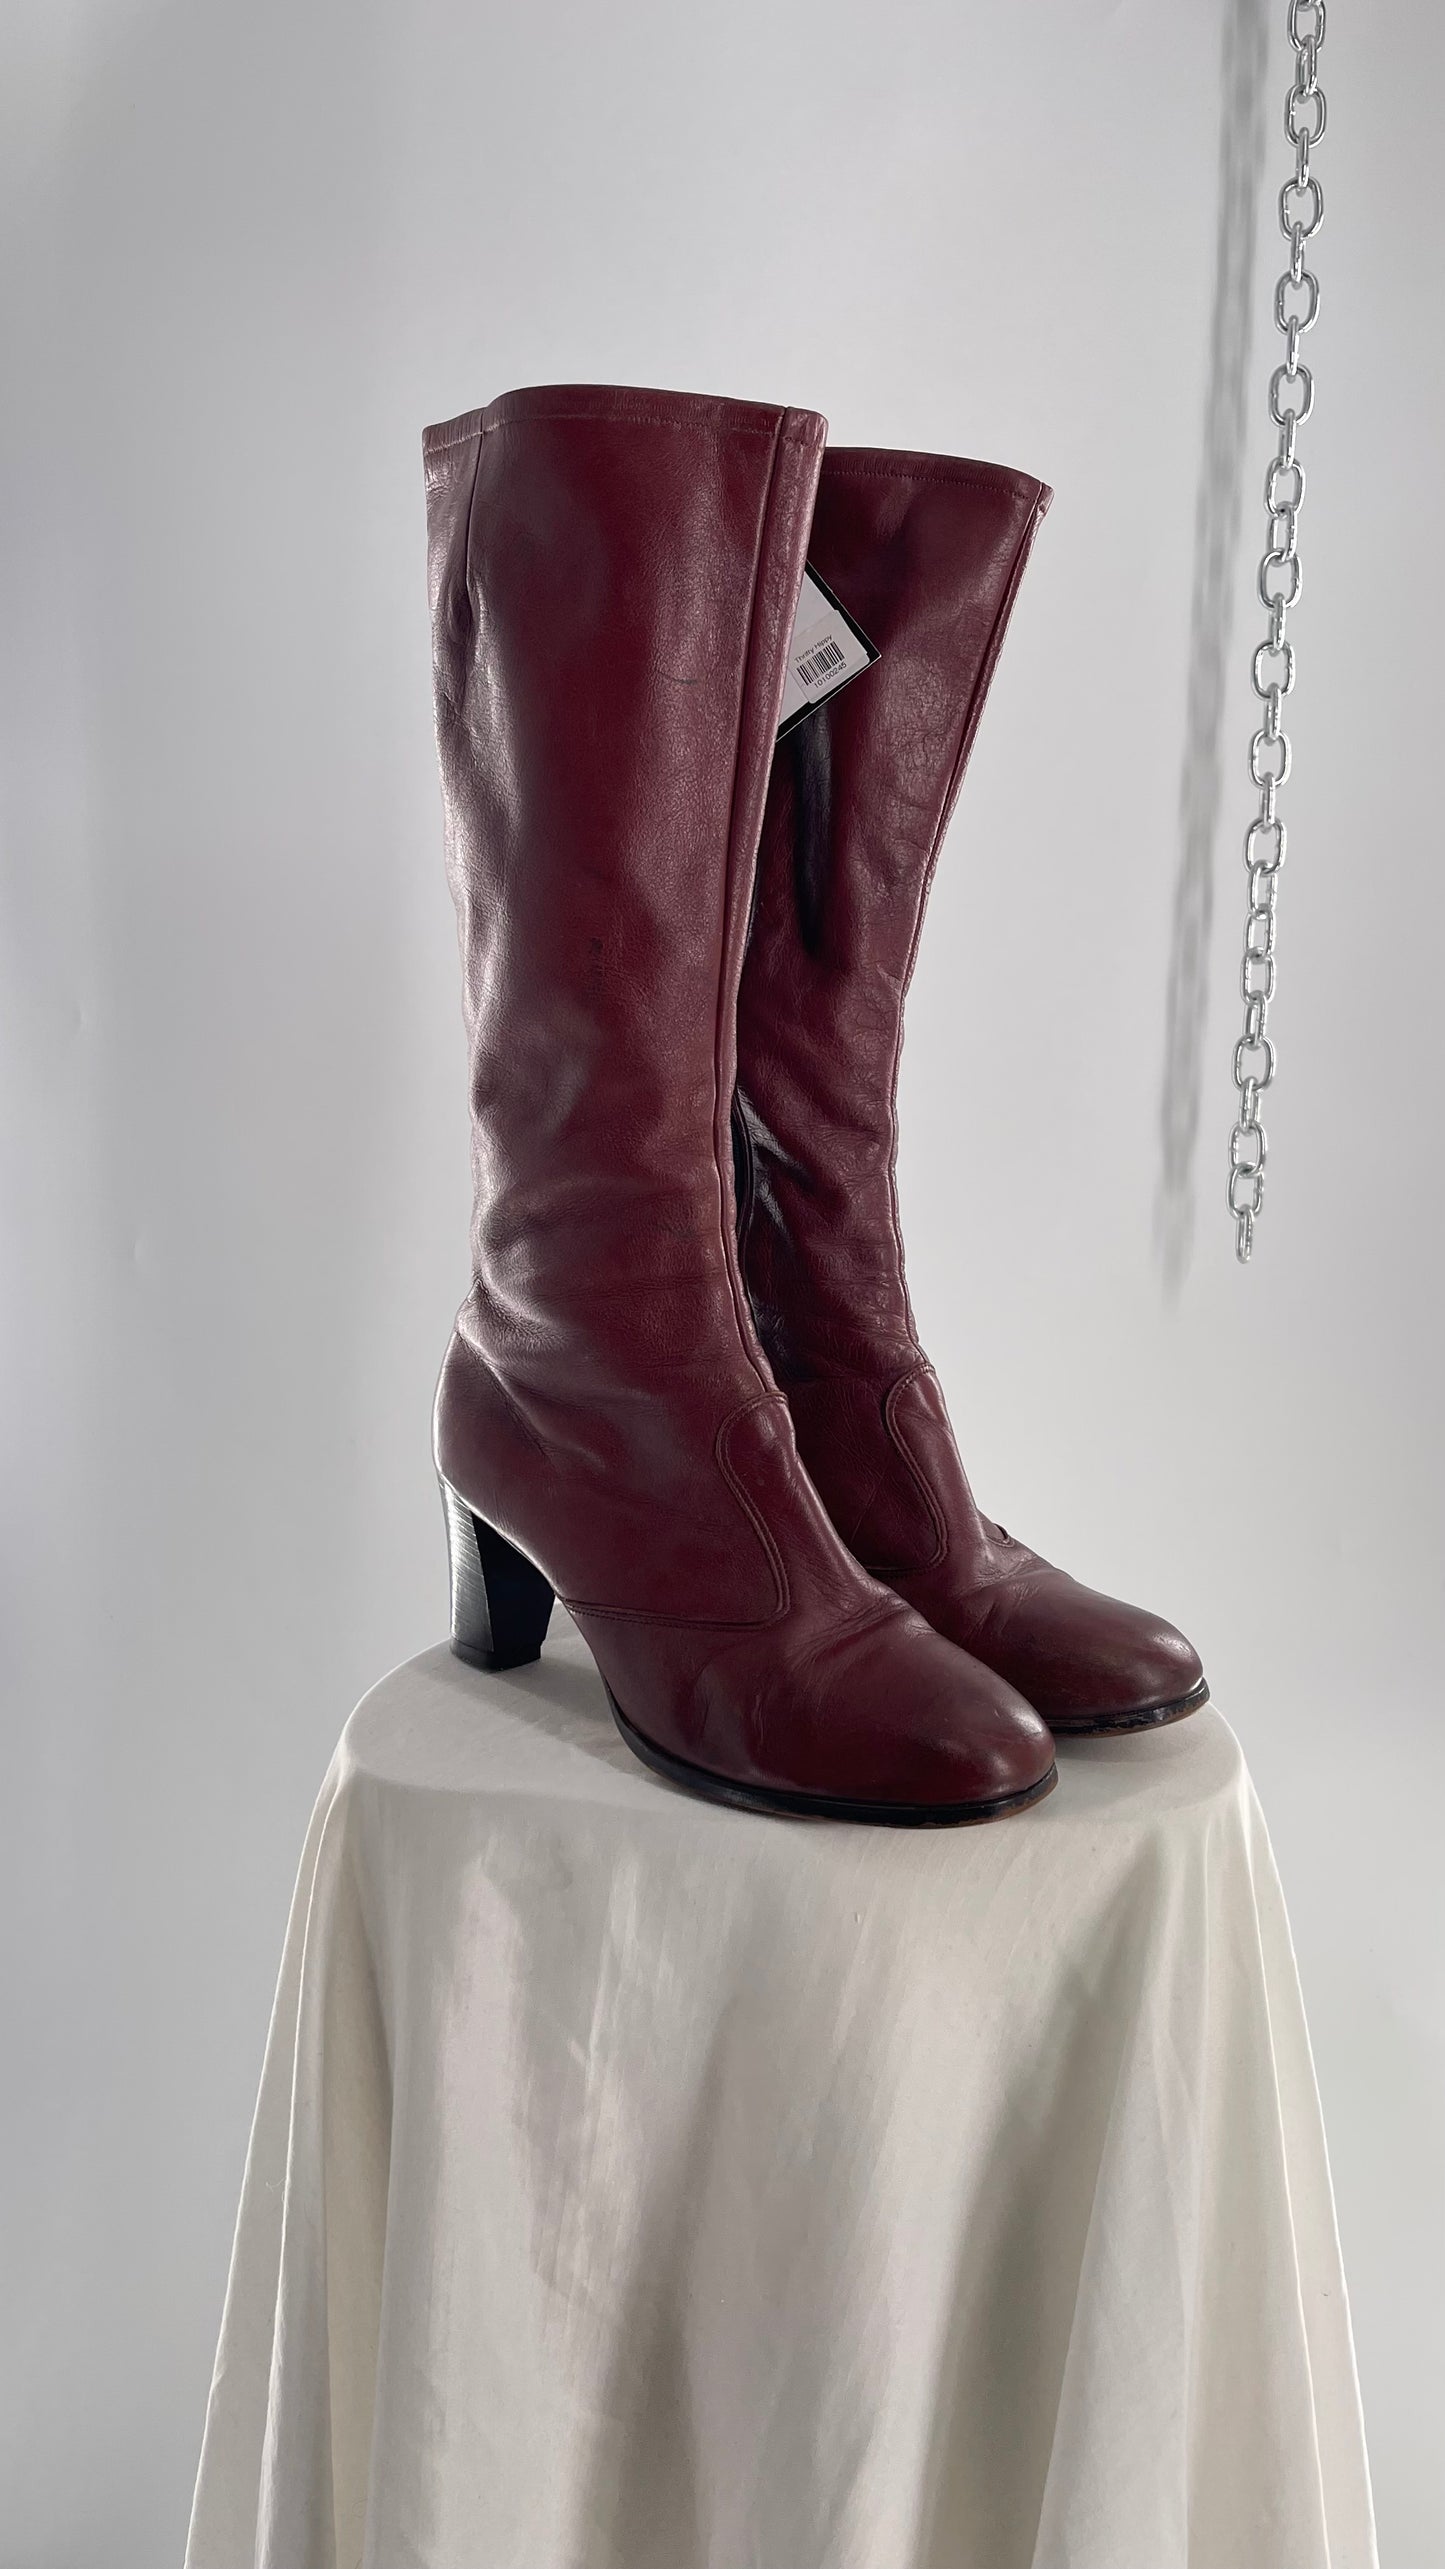 Vintage Cherry Cola Red Knee High Leather Boot with Heel (8.5)